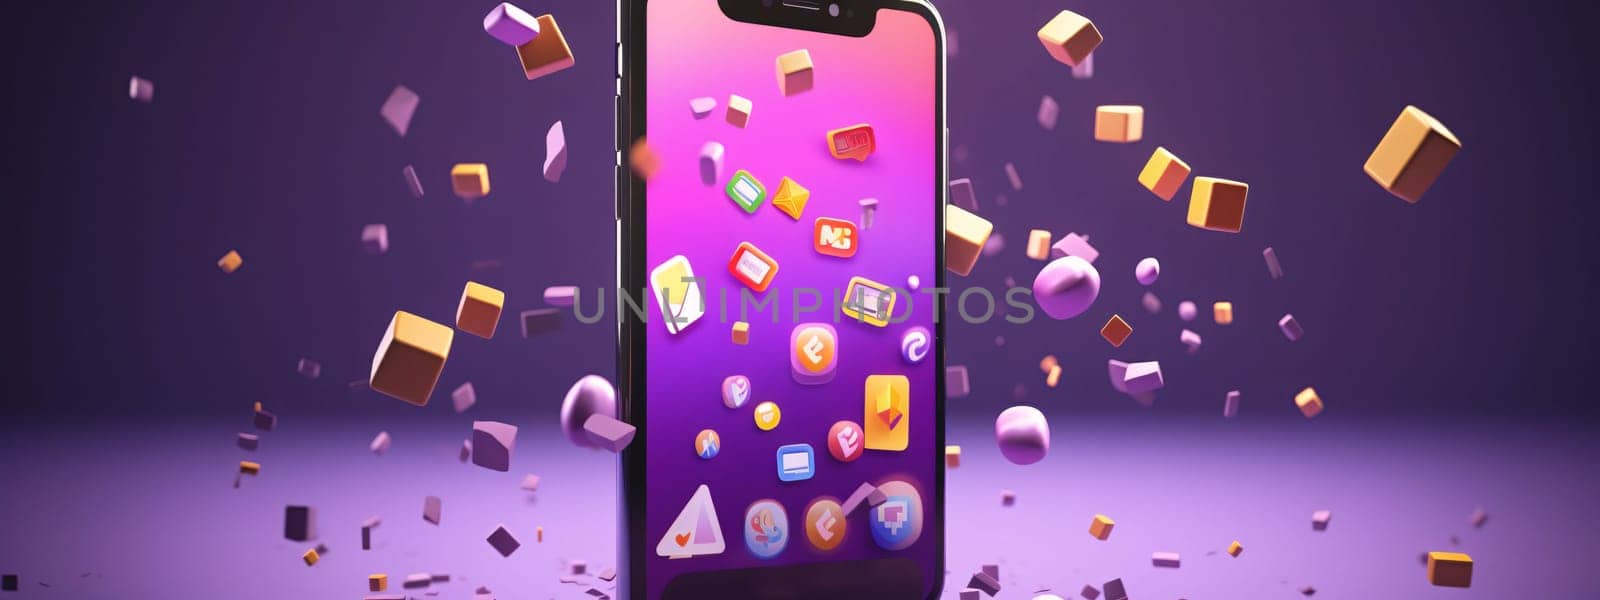 Smartphone screen: 3d rendering of colorful cubes flying out of a smartphone on purple background